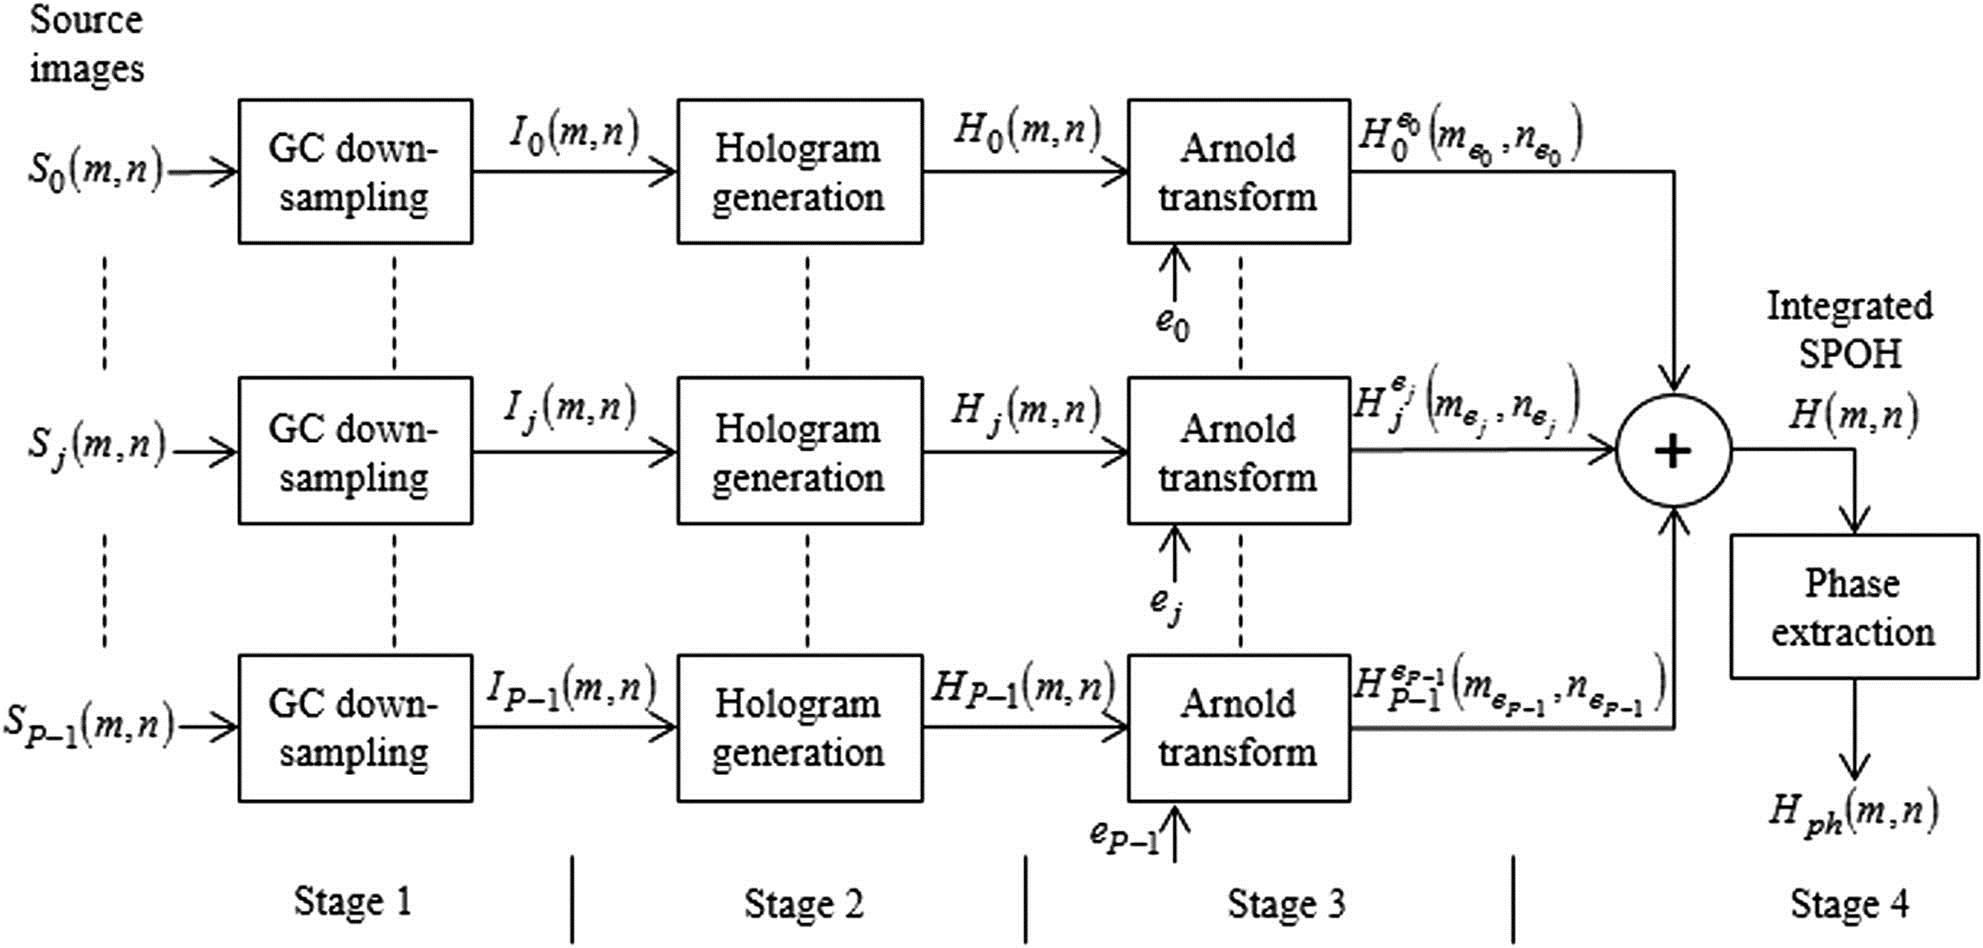 Proposed method for integrating multiple images into a single phase-only hologram.